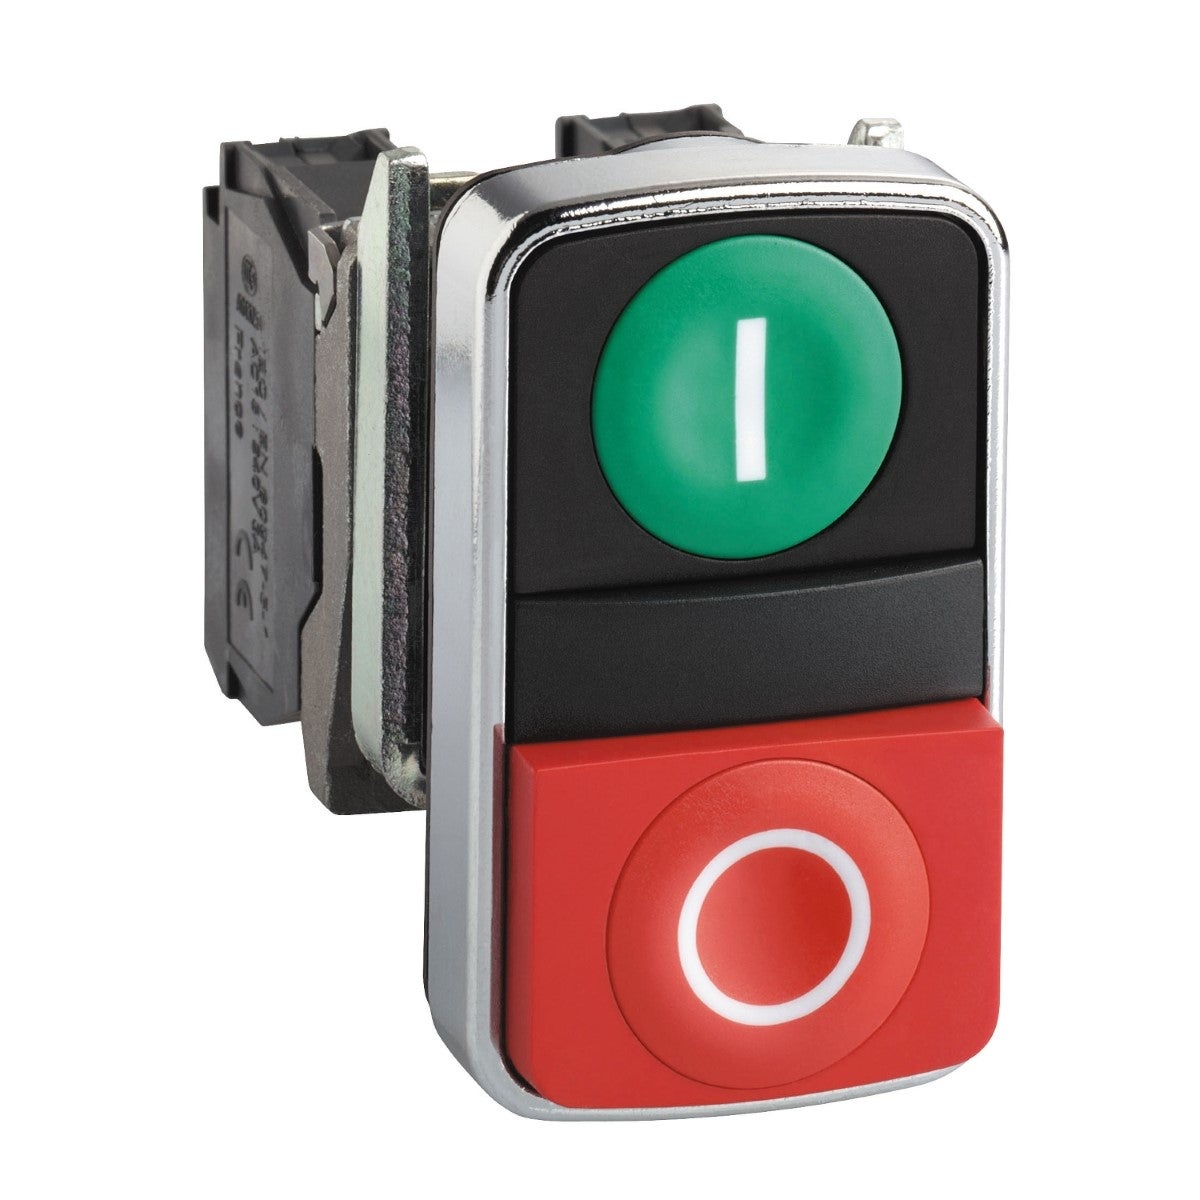 Harmony XB4, Double-headed push button, metal, Ø22, 1 green flush marked I + 1 red projecting marked O, 1 NO + 1 NC